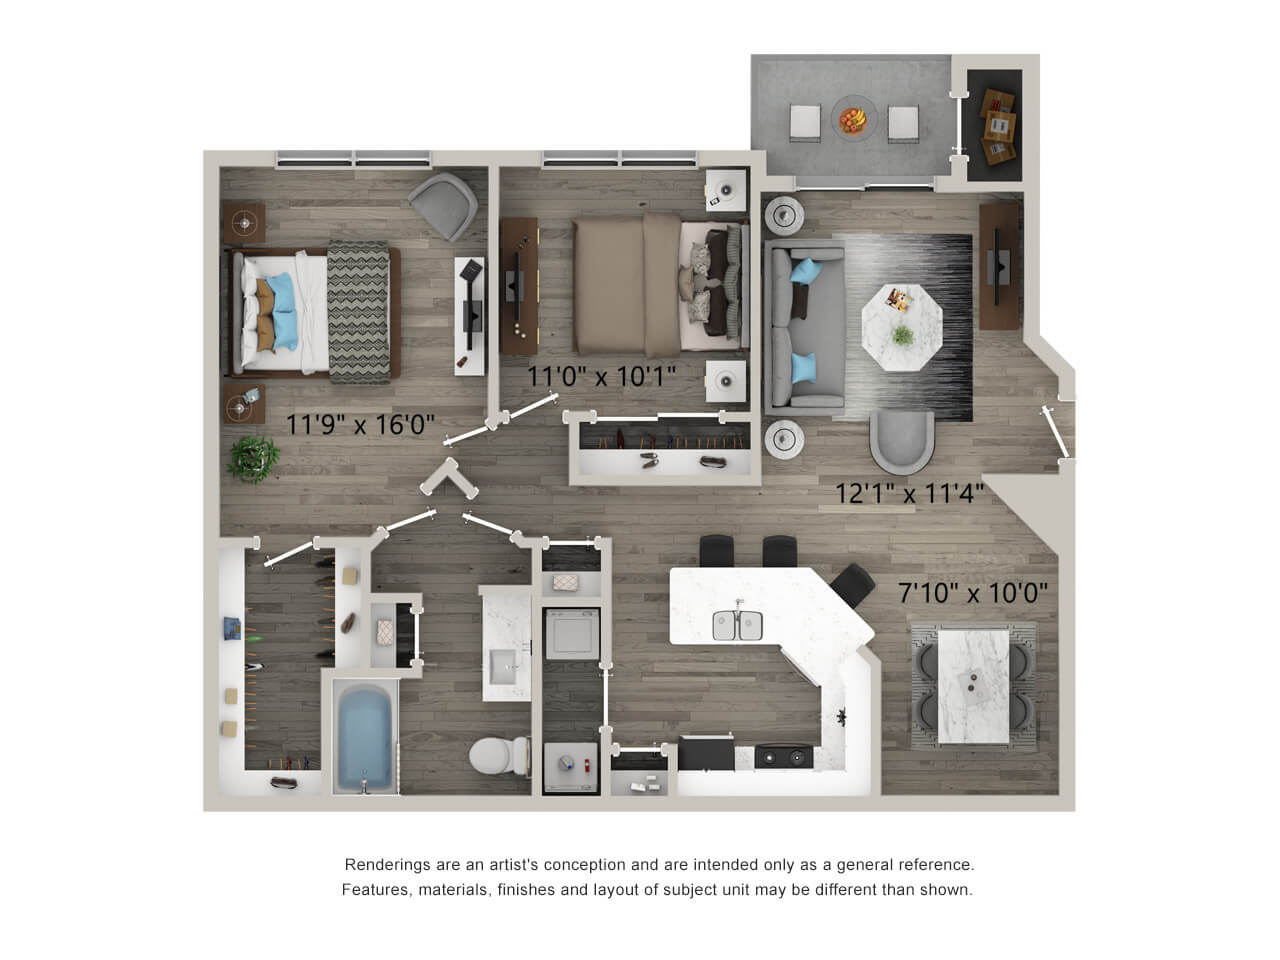 two bed one bath 1,000 square foot floor plan